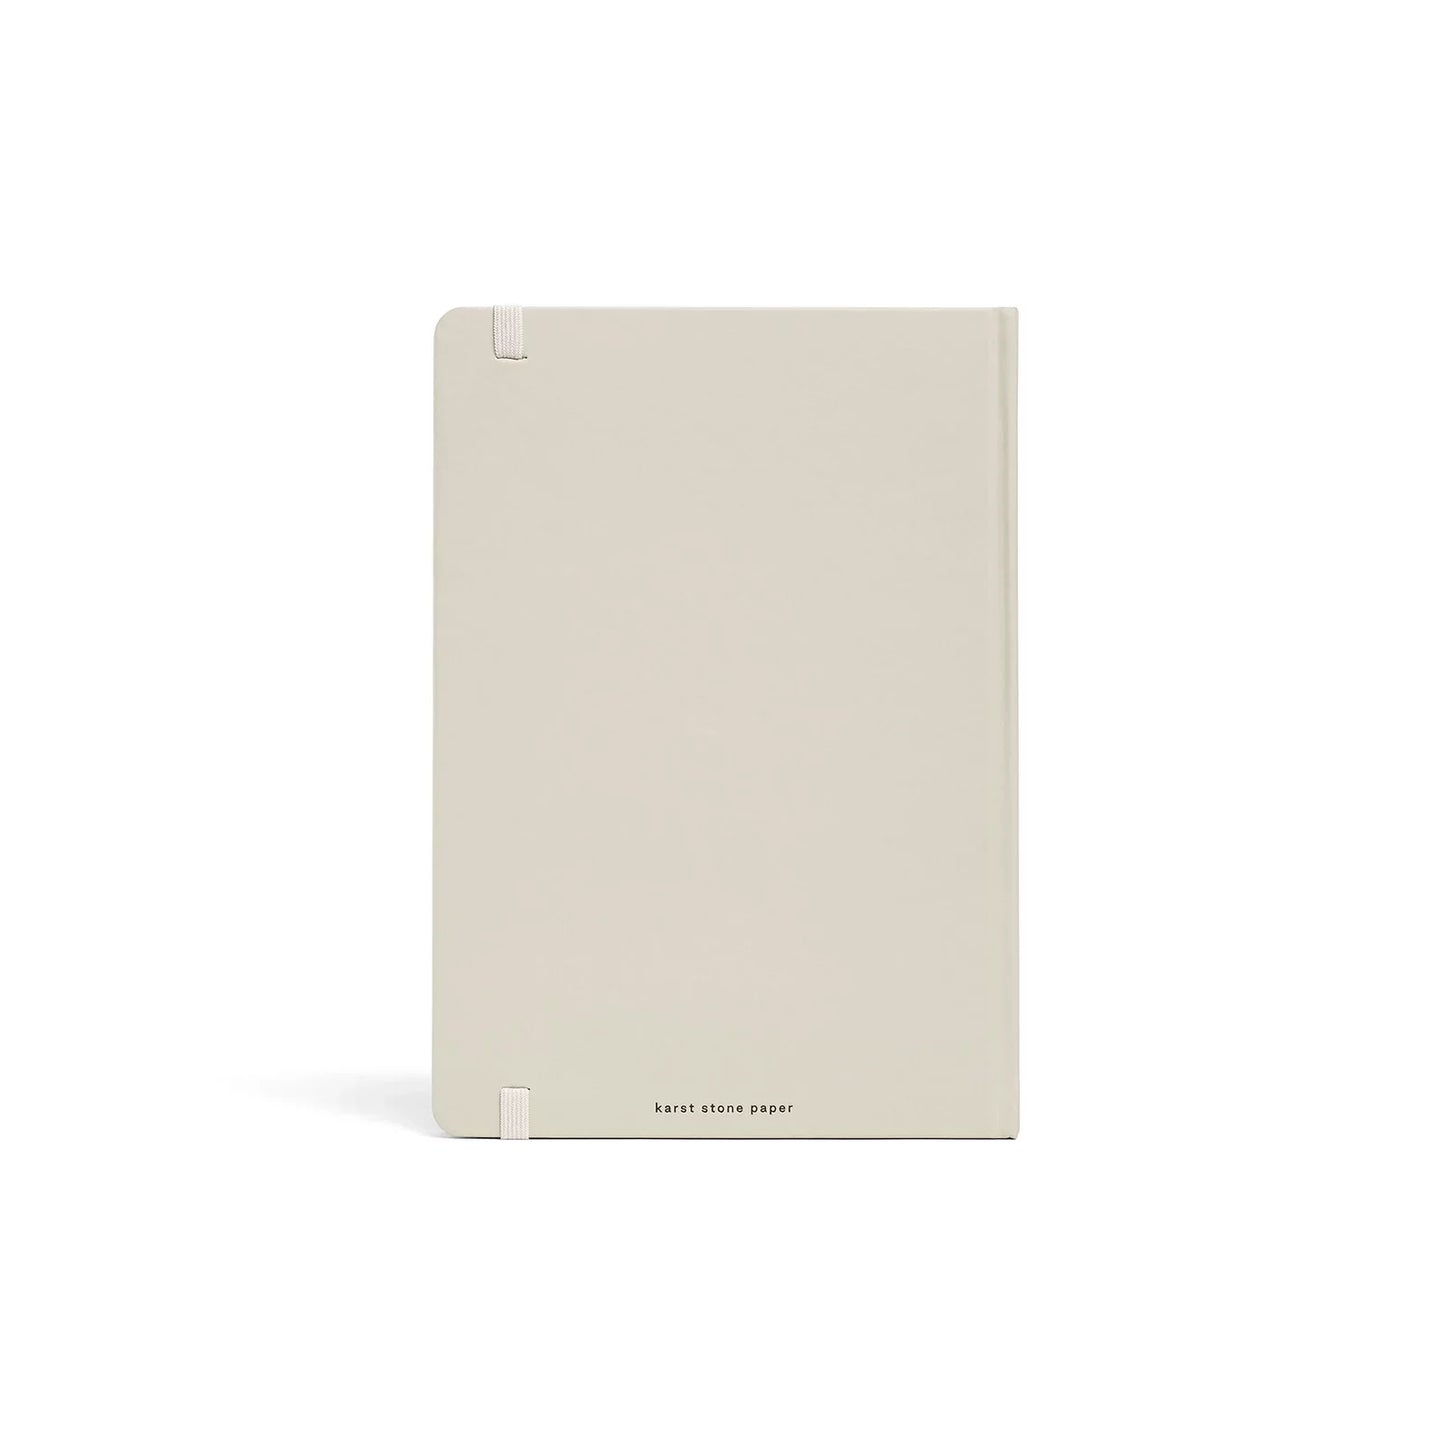 Karst Notebook A5 Hardcover - Stone (Dotted)